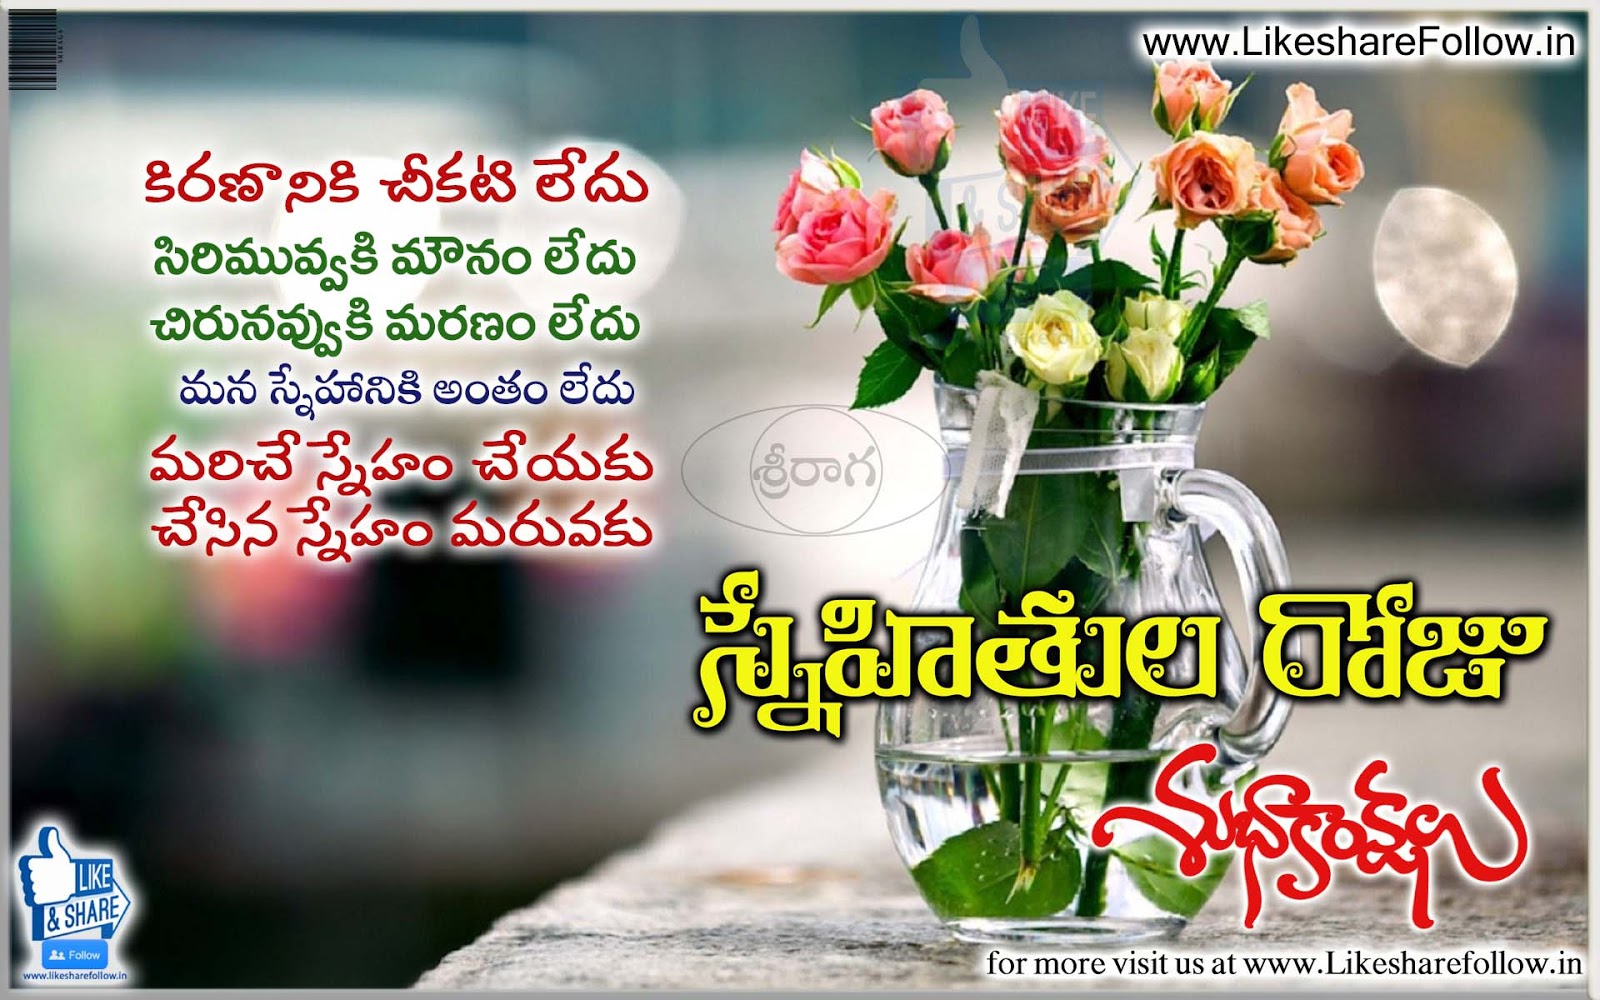 All Time Best Telugu Friendship Day Quotations messages | Like ...